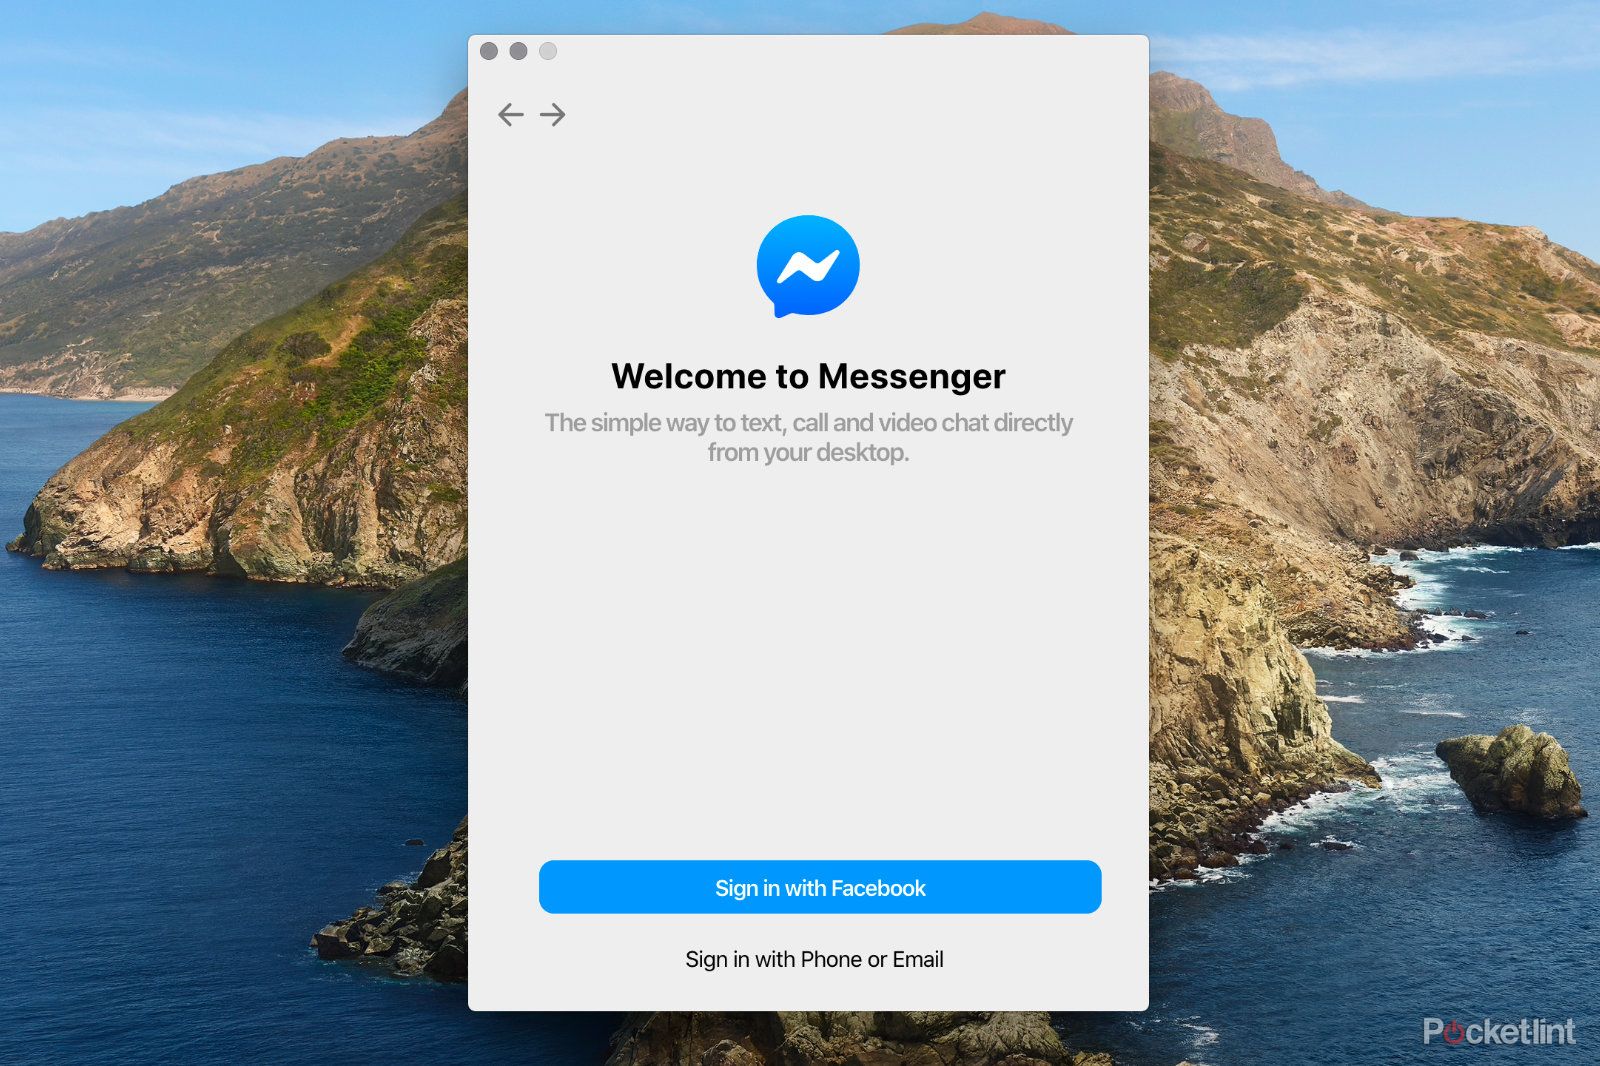 Facebook Messenger desktop Mac and Windows app now available globally heres how to get it image 1